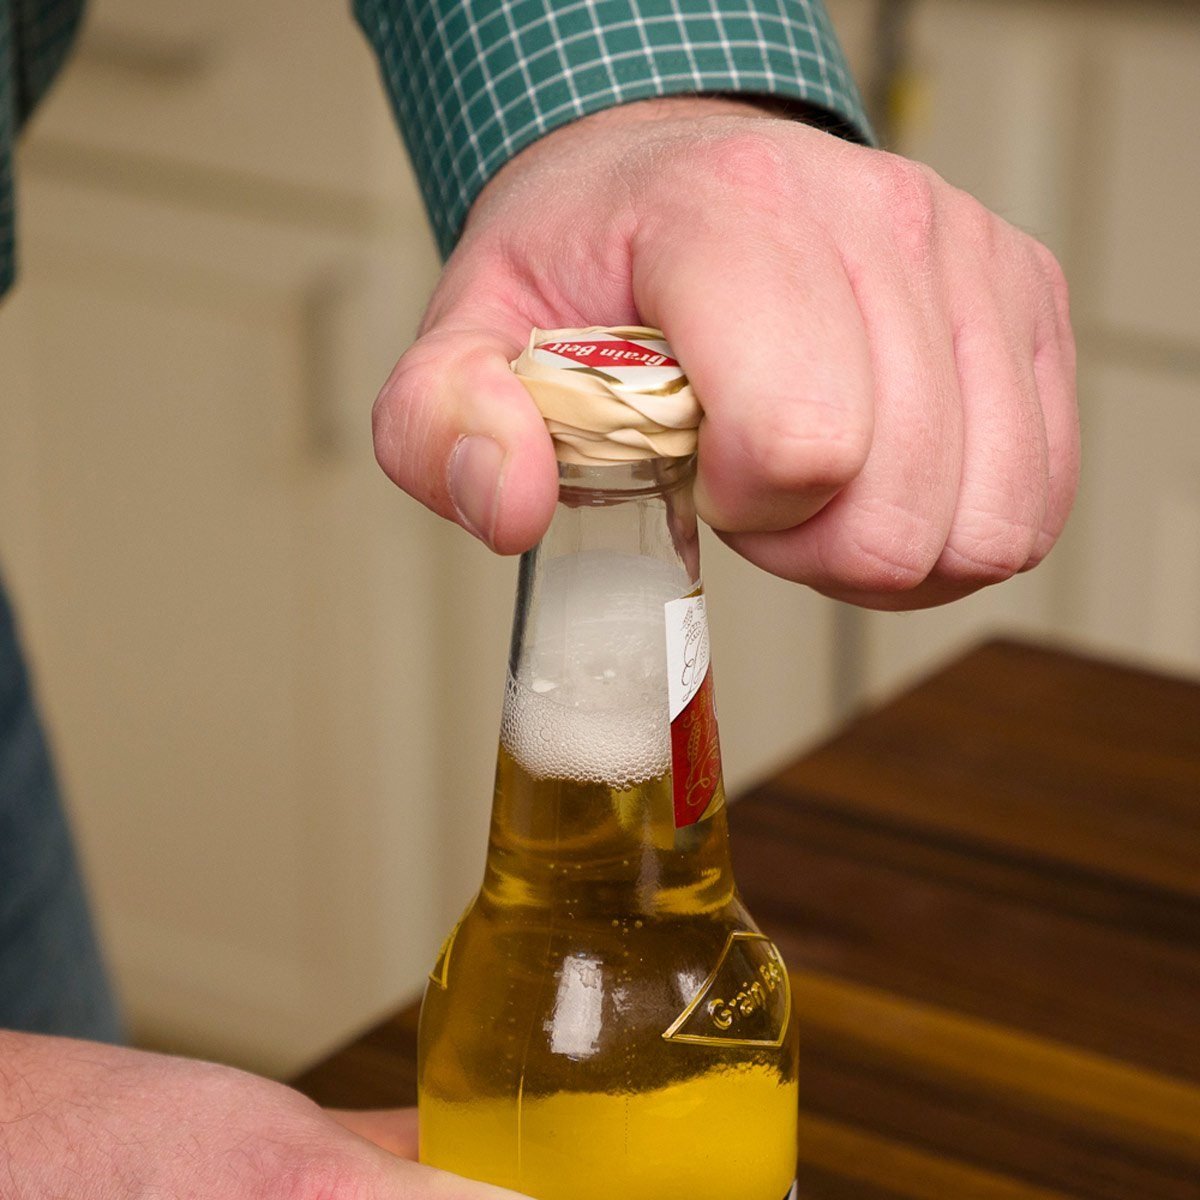 Opening a bottle with a rubber band